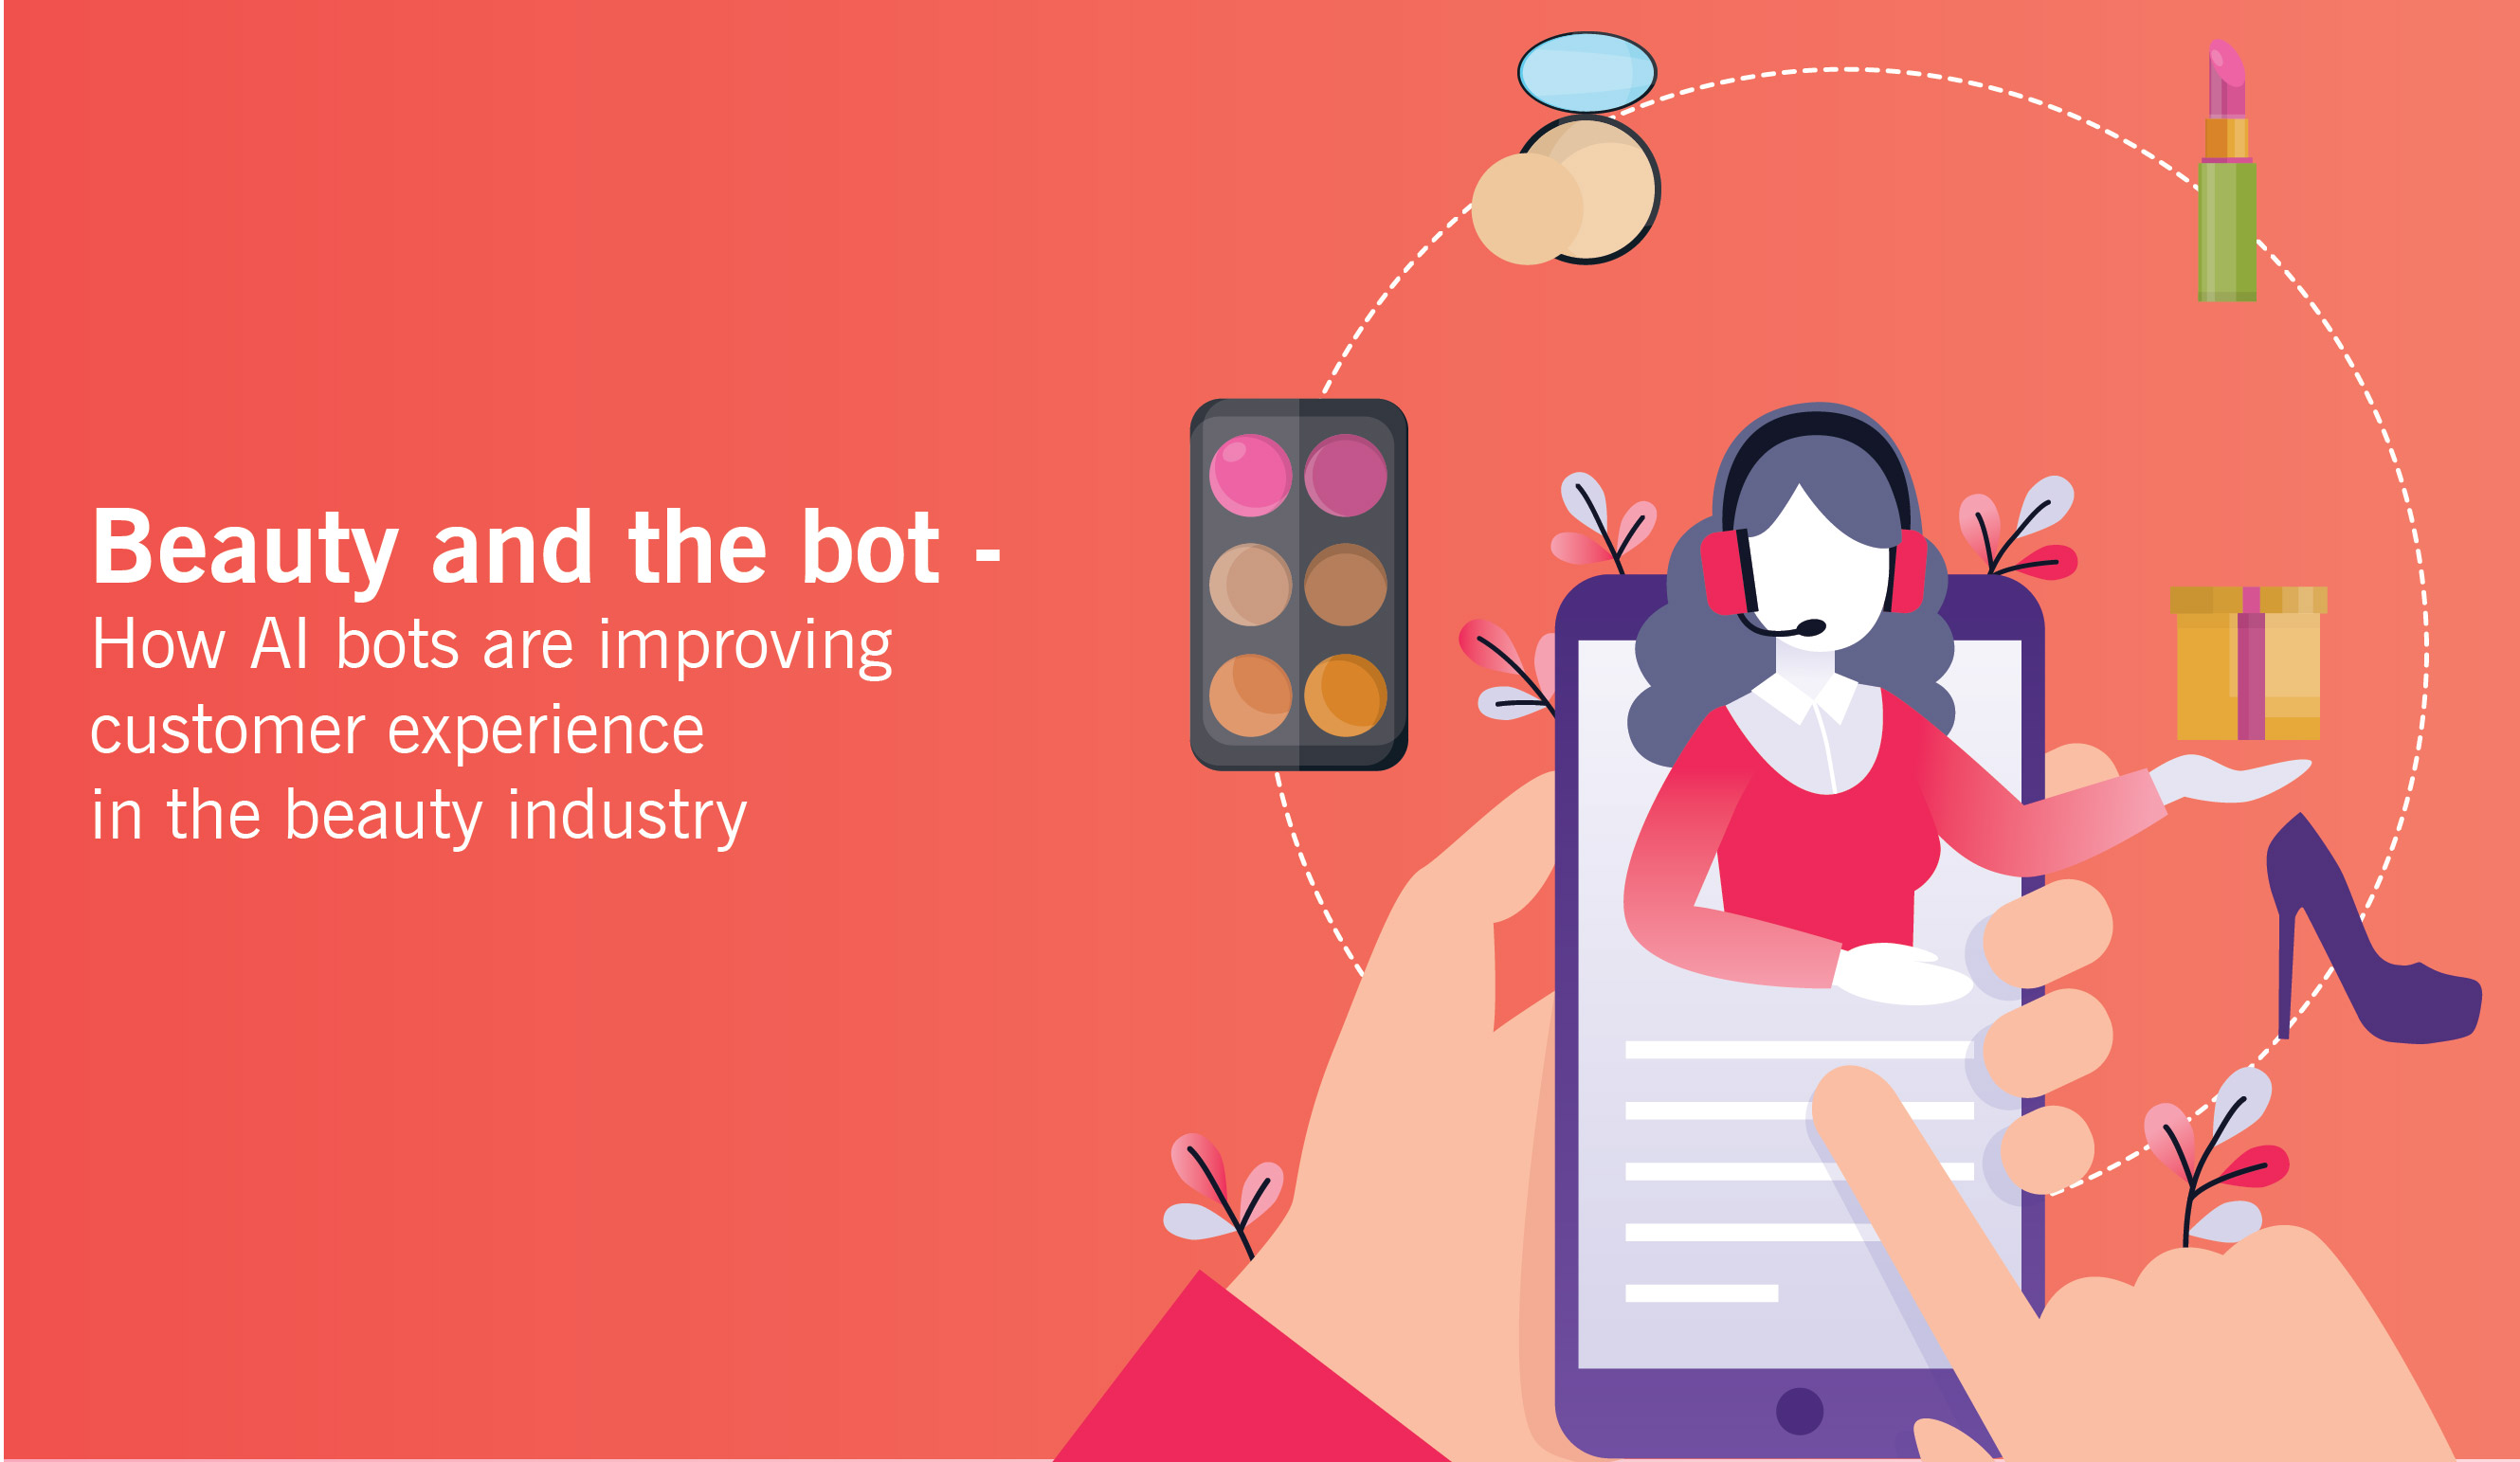 Beauty and the bot – How AI bots are improving customer experience in the beauty industry